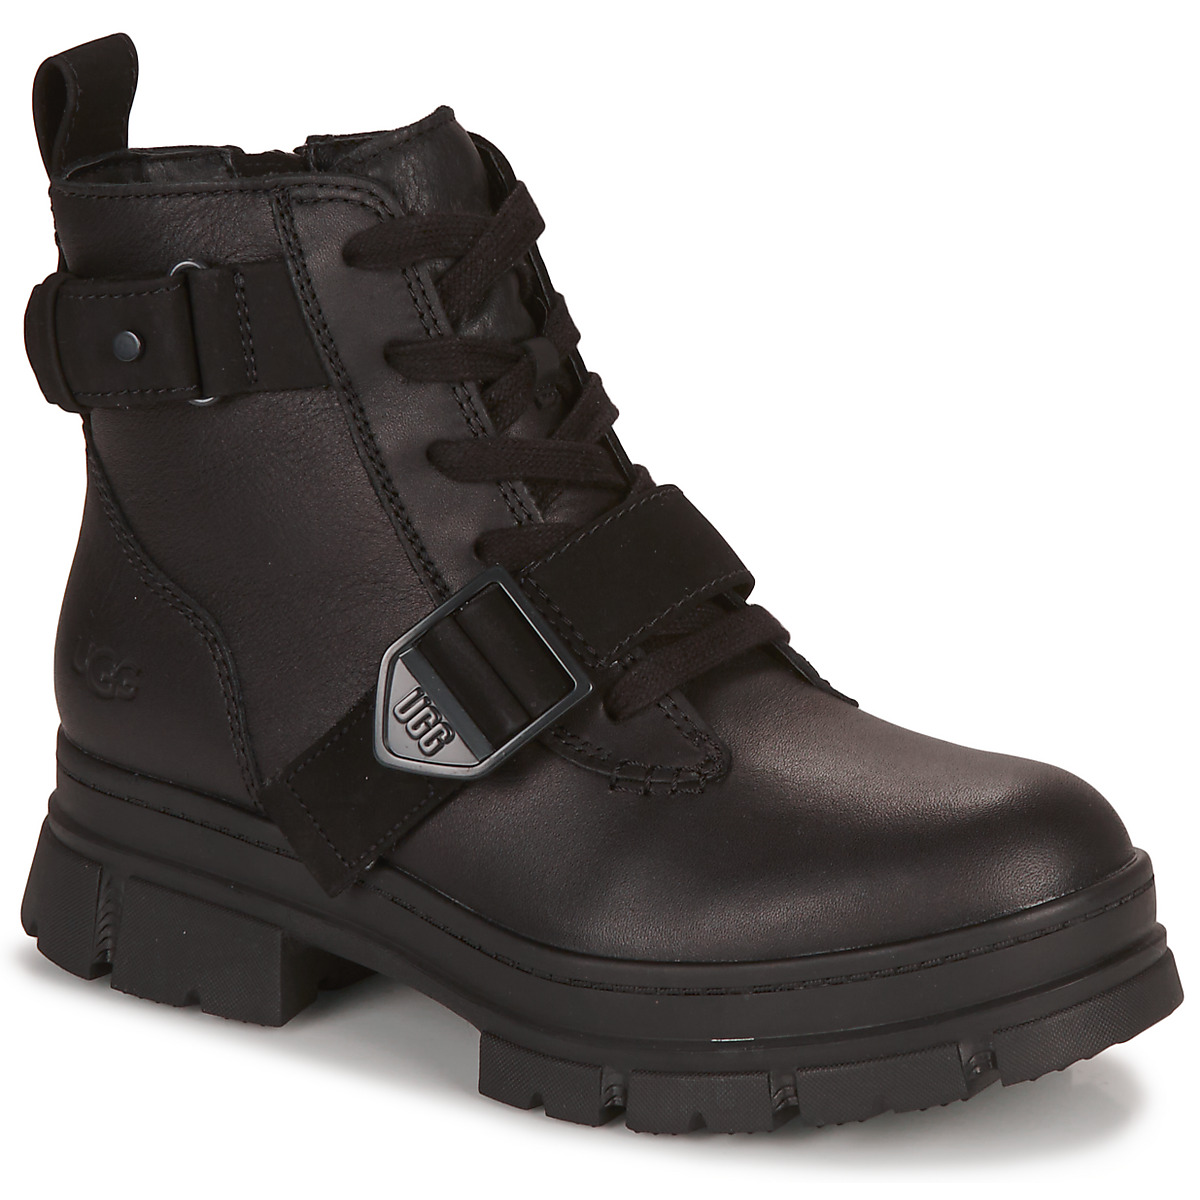 UGG Ashton Lace Up Boot for Women in Black, Size 5, Leather